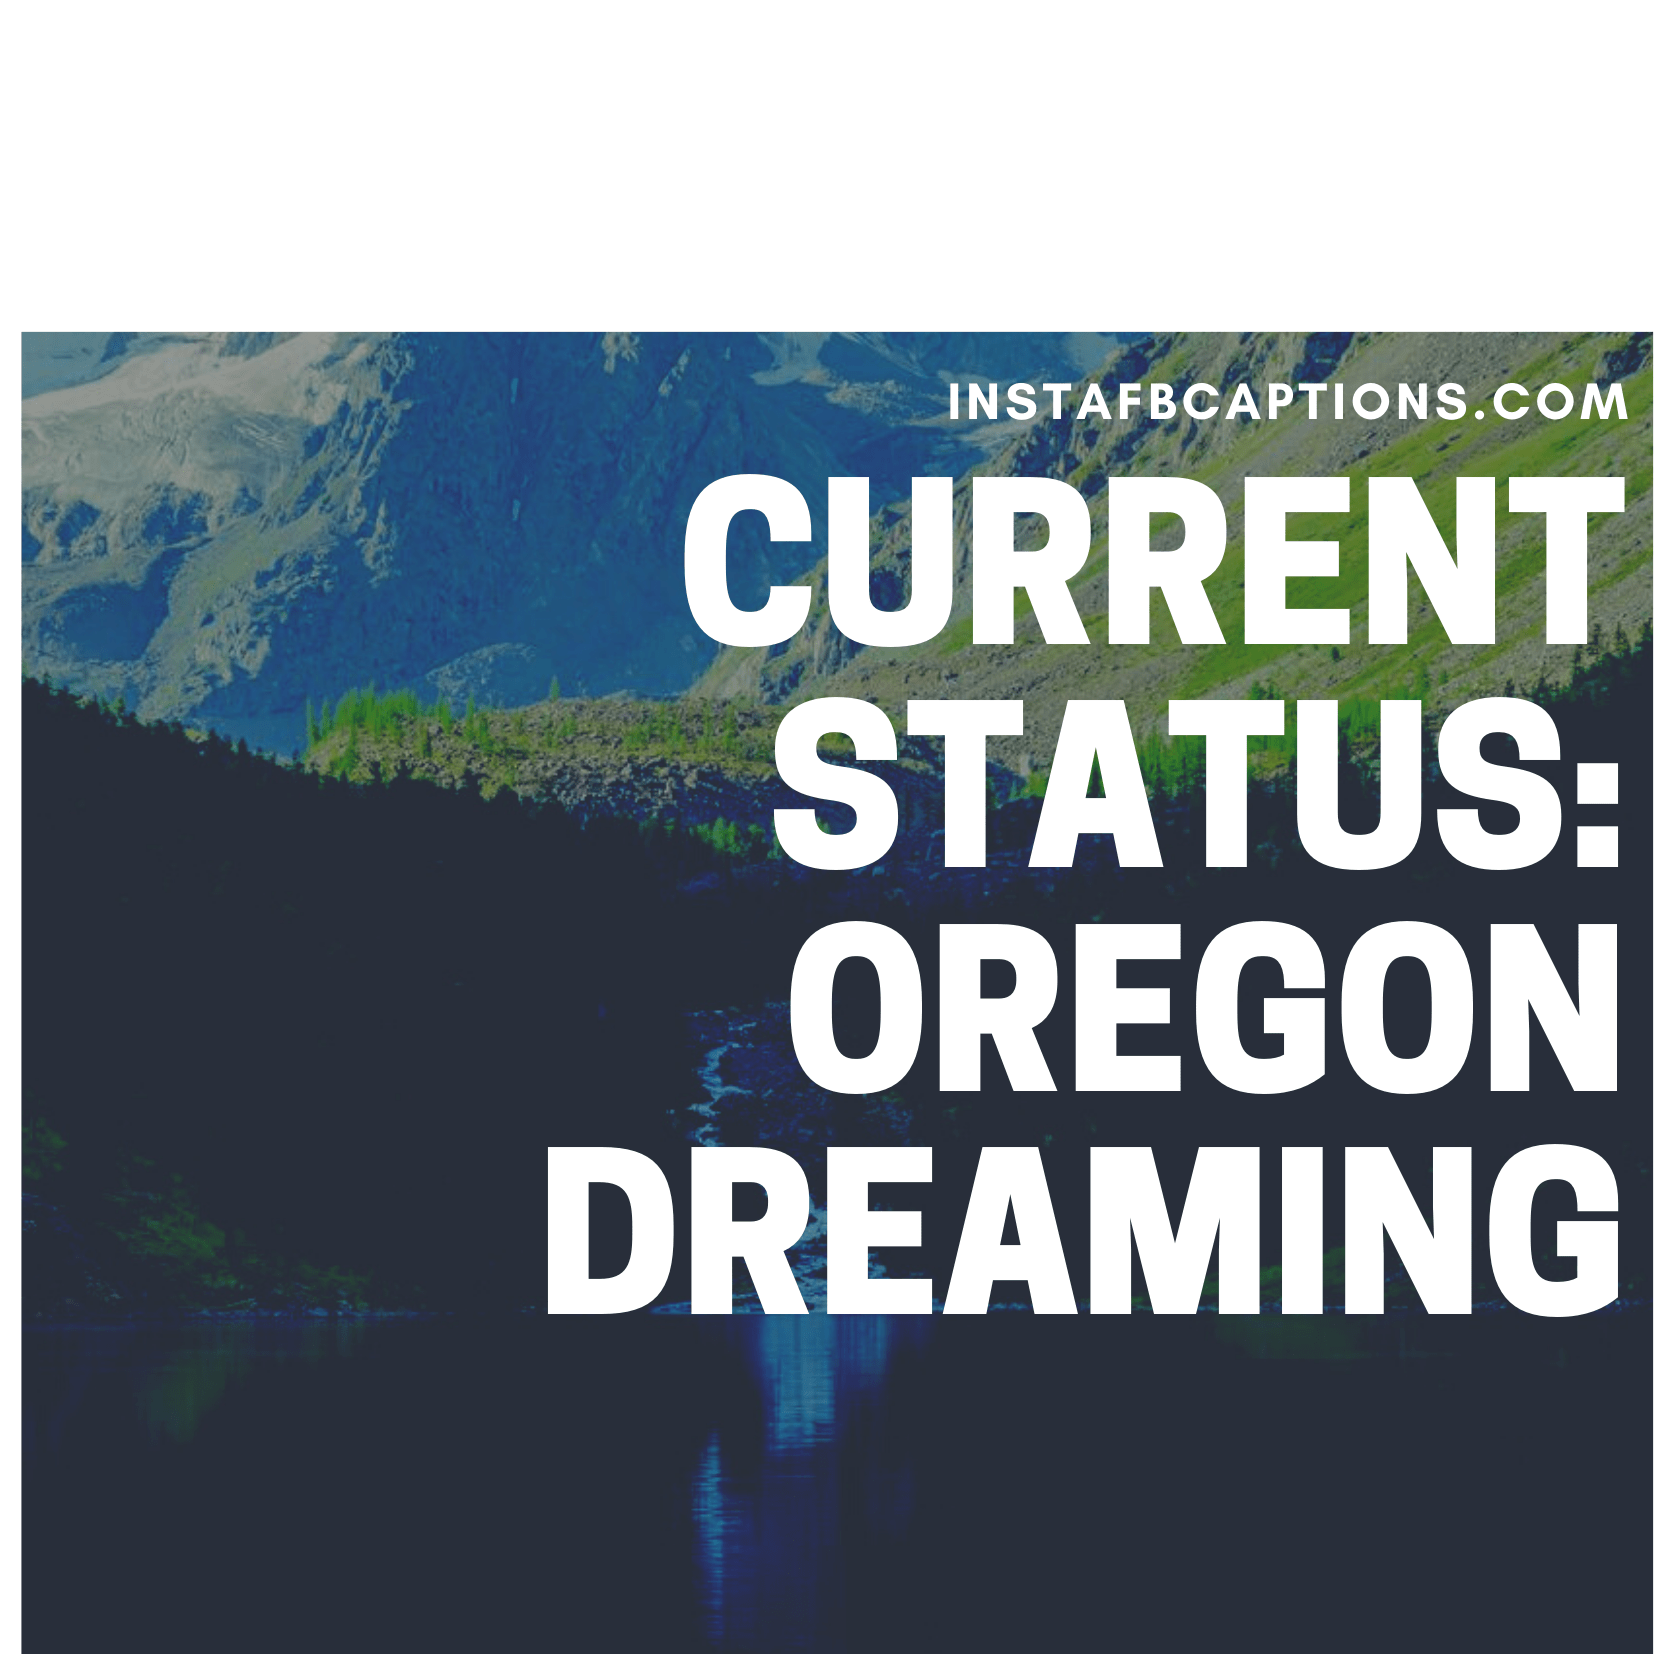 Famous Quotes About Orego  - Famous Quotes about Oregon - 72+ Oregon Instagram Captions for Coast Pics in 2023